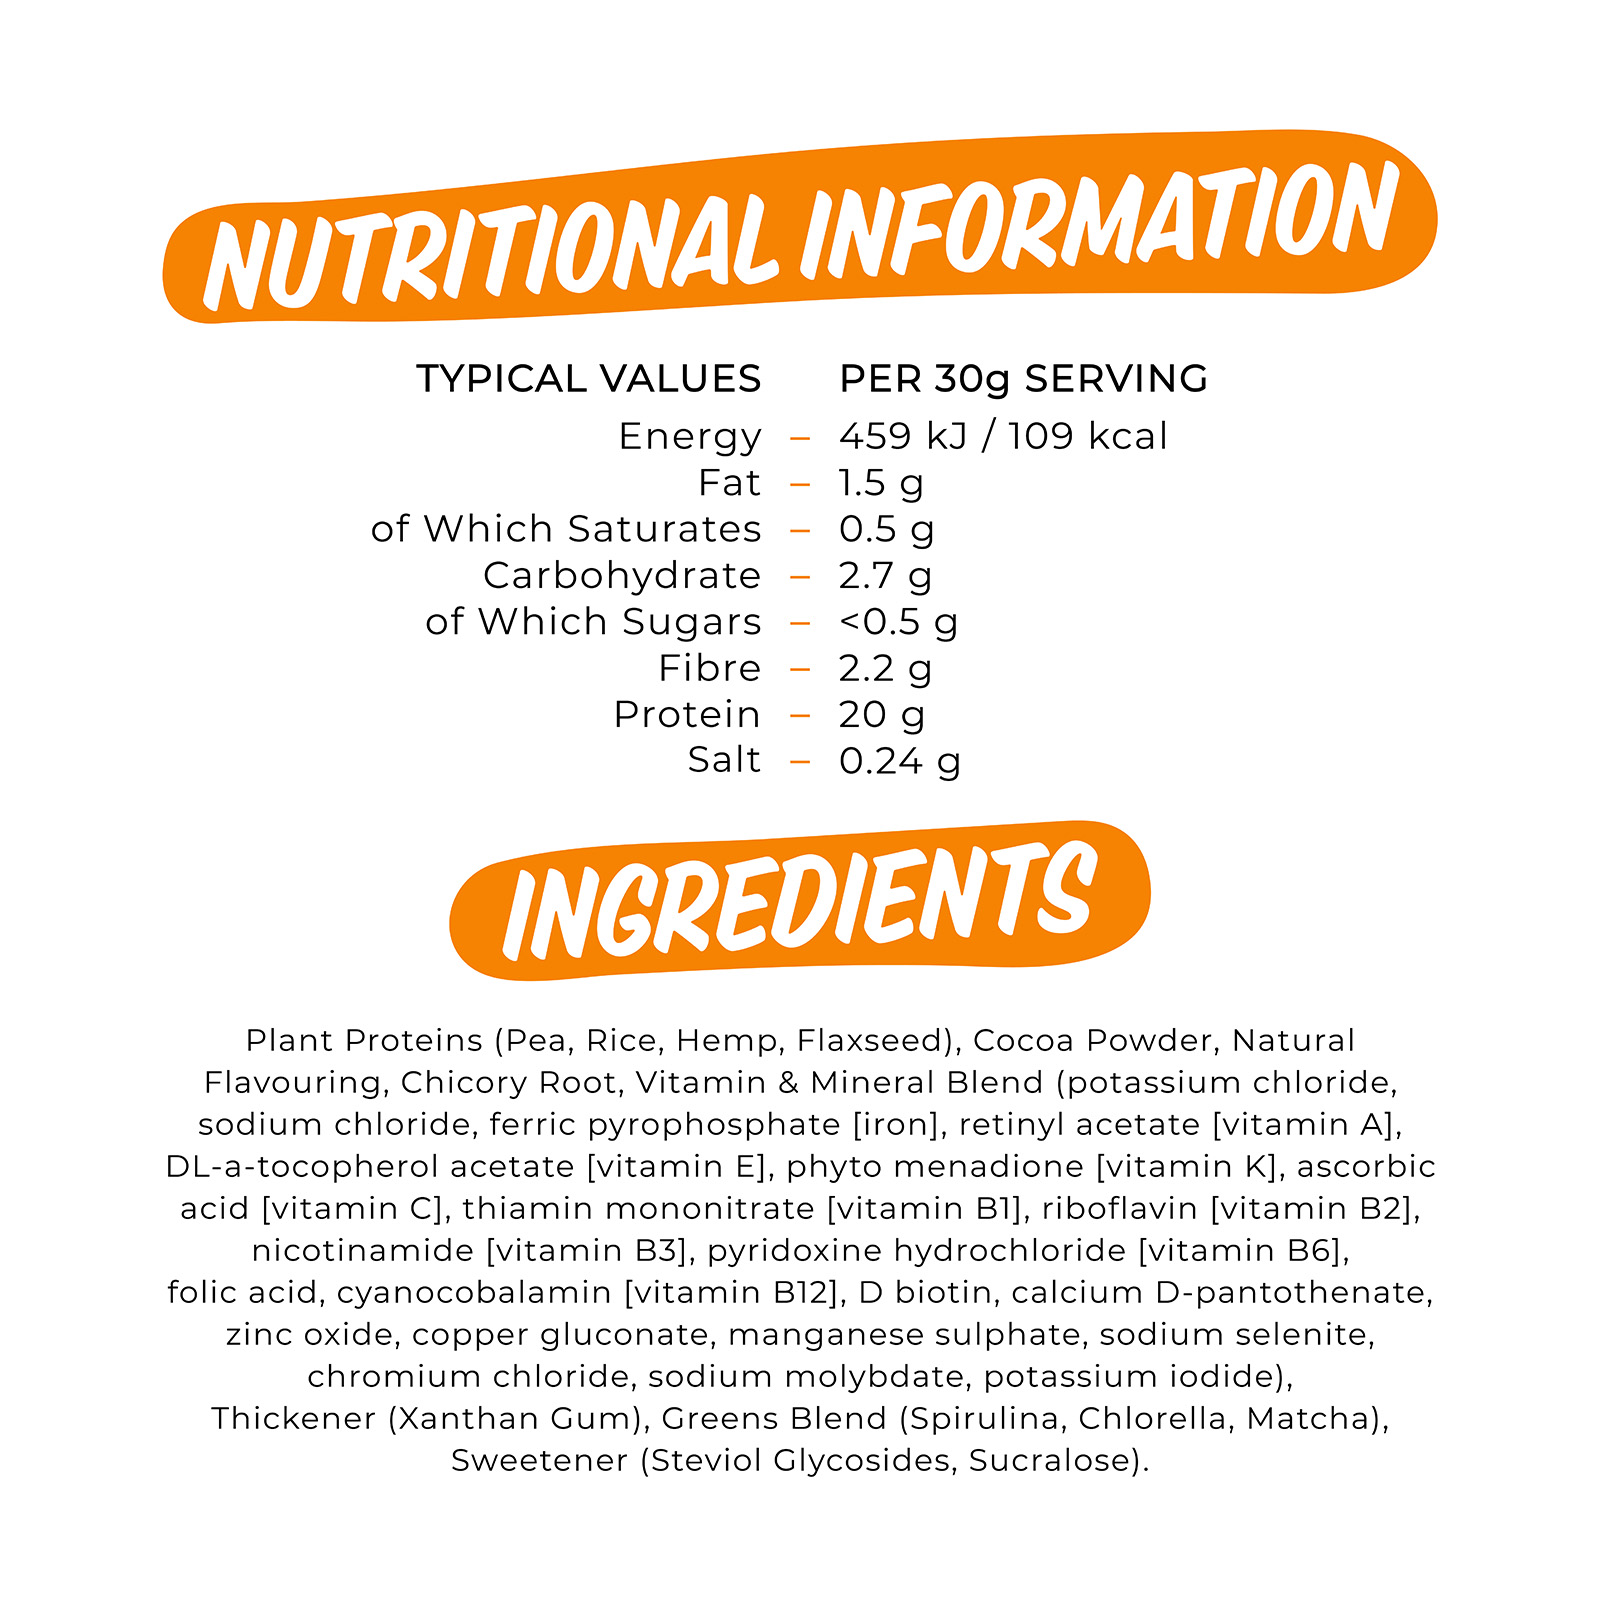 

                          TYPICAL VALUES PER 30g SERVING Energy 459 kJ /109 kcal Fat 1.5 g of Which Saturates 0.5 g Carbohydrate 2.7 g of Which Sugars <0.5 g Fibre 2.2 g Protein 20 g Salt 0.24 g 

                          Plant Proteins (Pea, Rice, Hemp, Flaxseed), Cocoa Powder, Natural Flavouring, Chicory Root, Vitamin & Mineral Blend (potassium chloride, sodium chloride, ferric pyrophosphate [iron], retinyl acetate [vitamin A], DL-a-tocopherol acetate [vitamin E], phyto menadione [vitamin K], ascorbic acid [vitamin C], thiamin mononitrate [vitamin B1], riboflavin [vitamin B2], nicotinamide [vitamin B3], pyridoxine hydrochloride [vitamin B6], folic acid, cyanocobalamin [vitamin B12], D biotin, calcium D-pantothenate, zinc oxide, copper gluconate, manganese sulphate, sodium selenite, chromium chloride, sodium molybdate, potassium iodide), Thickener (Xanthan Gum), Greens Blend (Spirulina, Chlorella, Matcha), Sweetener (Steviol Glycosides, Sucralose). 

                          